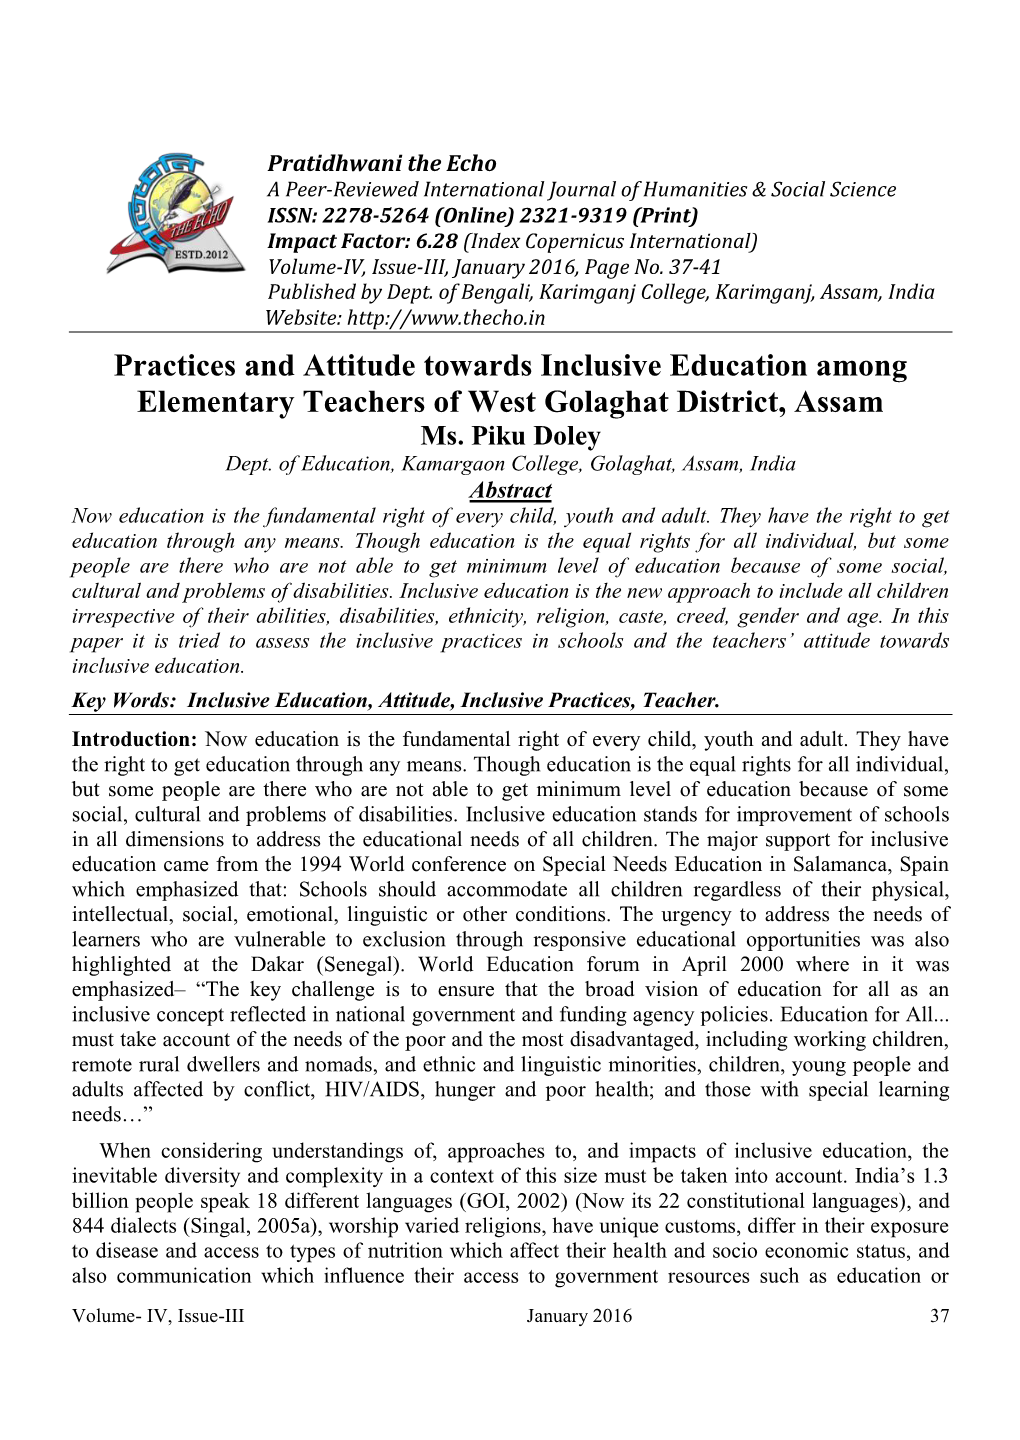 Practices and Attitude Towards Inclusive Education Among Elementary Teachers of West Golaghat District, Assam Ms